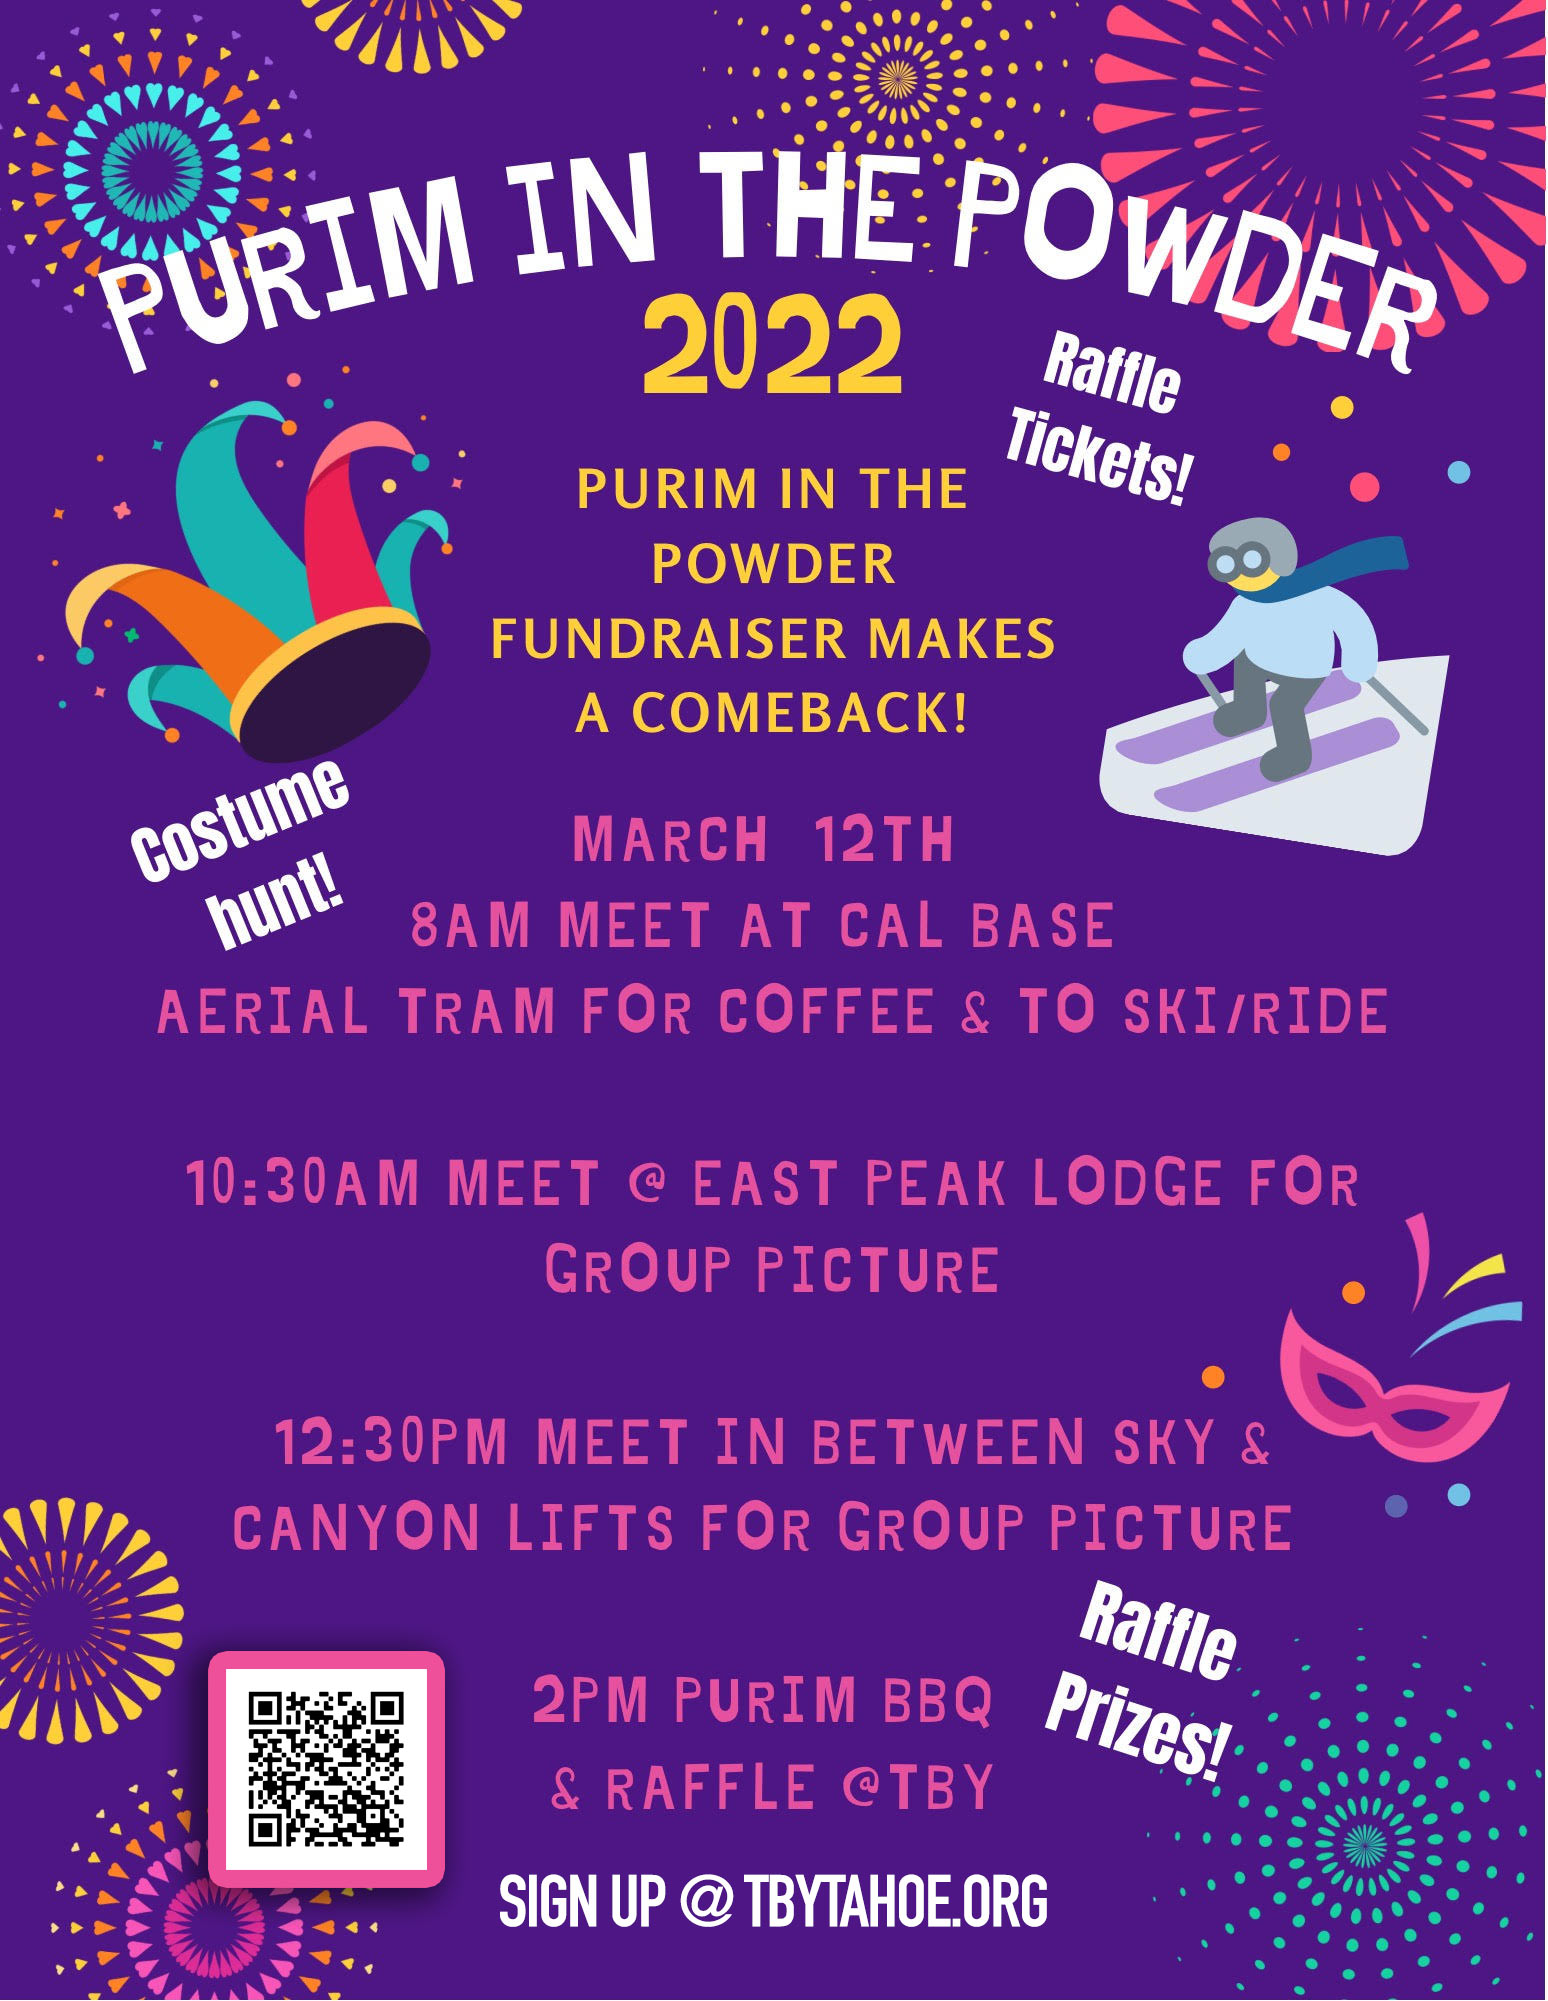 purim in the powder 2022 fundrasier and raffle